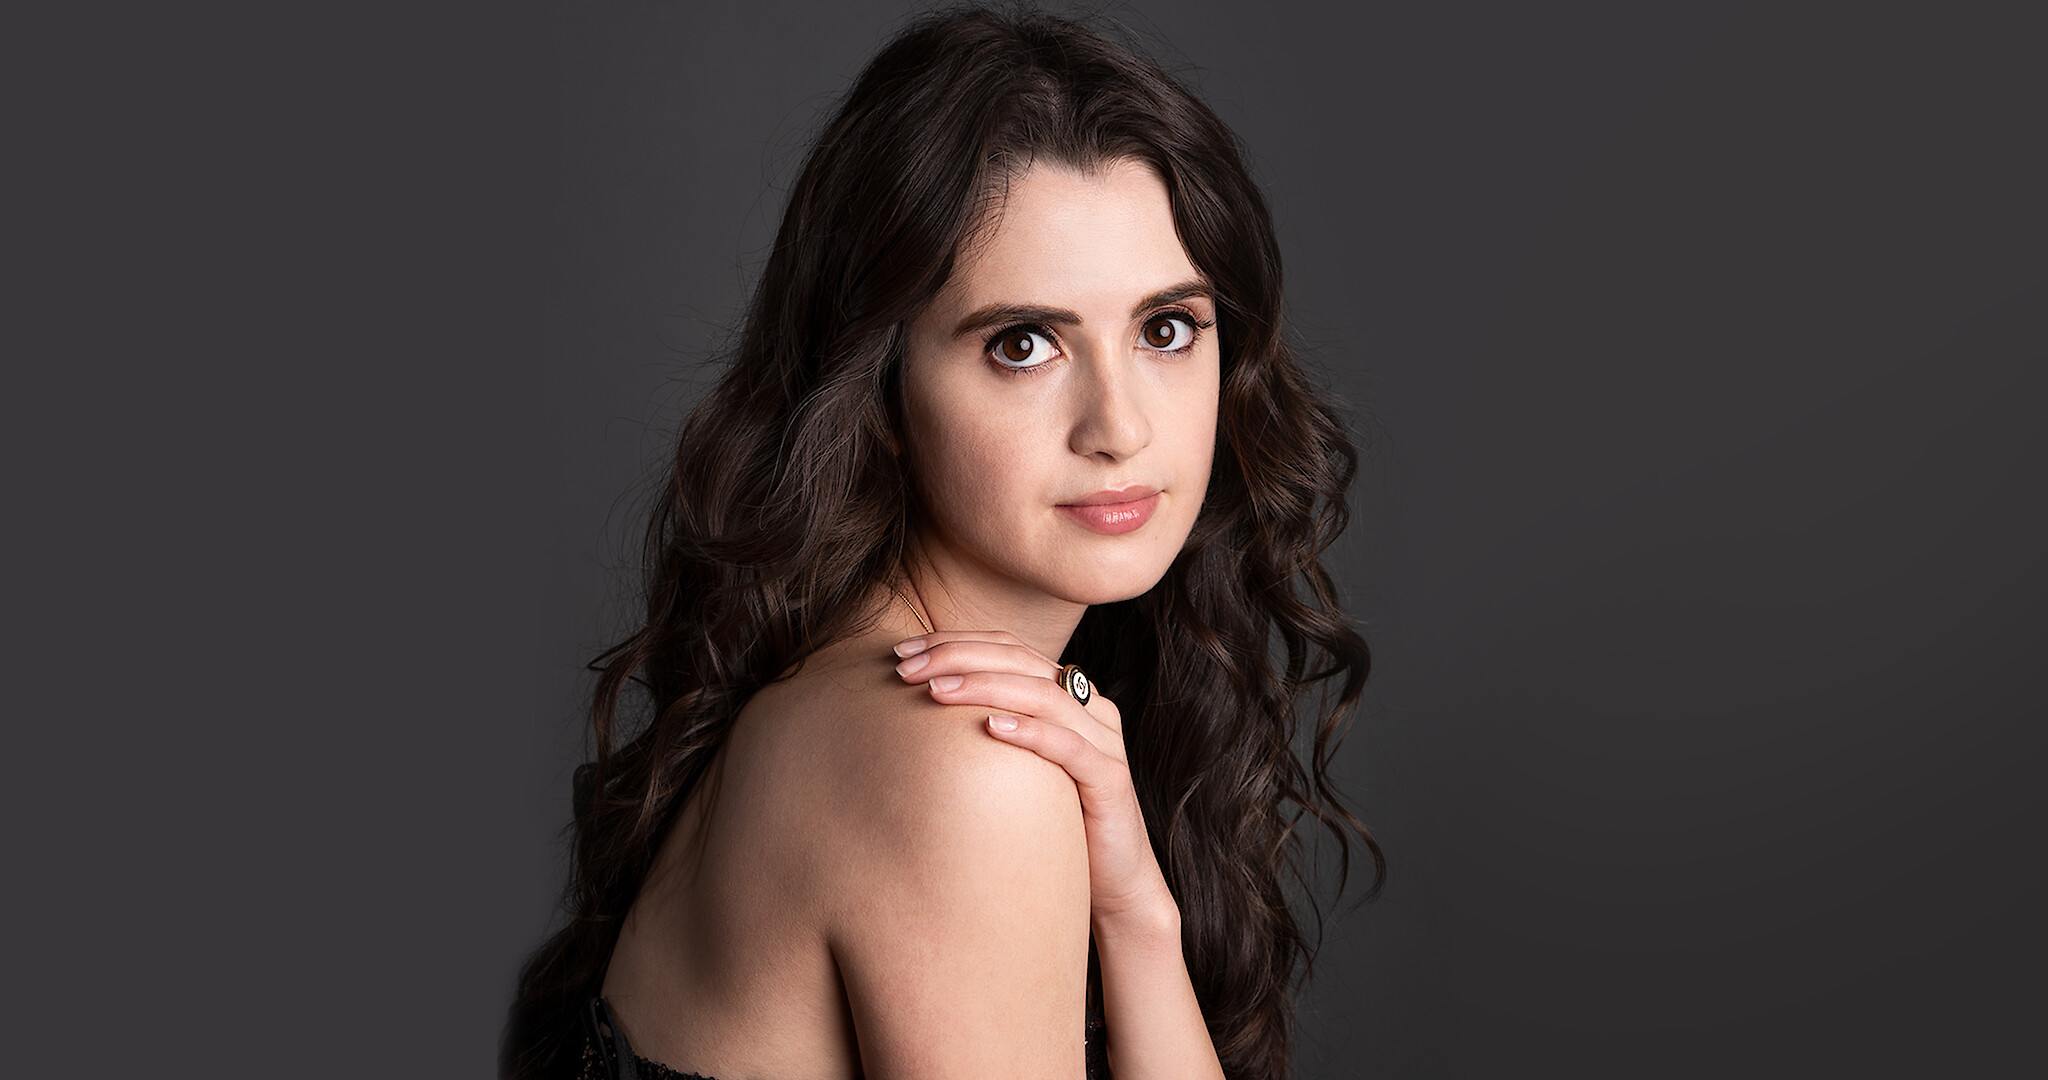 Play All I Want Is You (from the Netflix Film Choose Love) by Laura  Marano on  Music